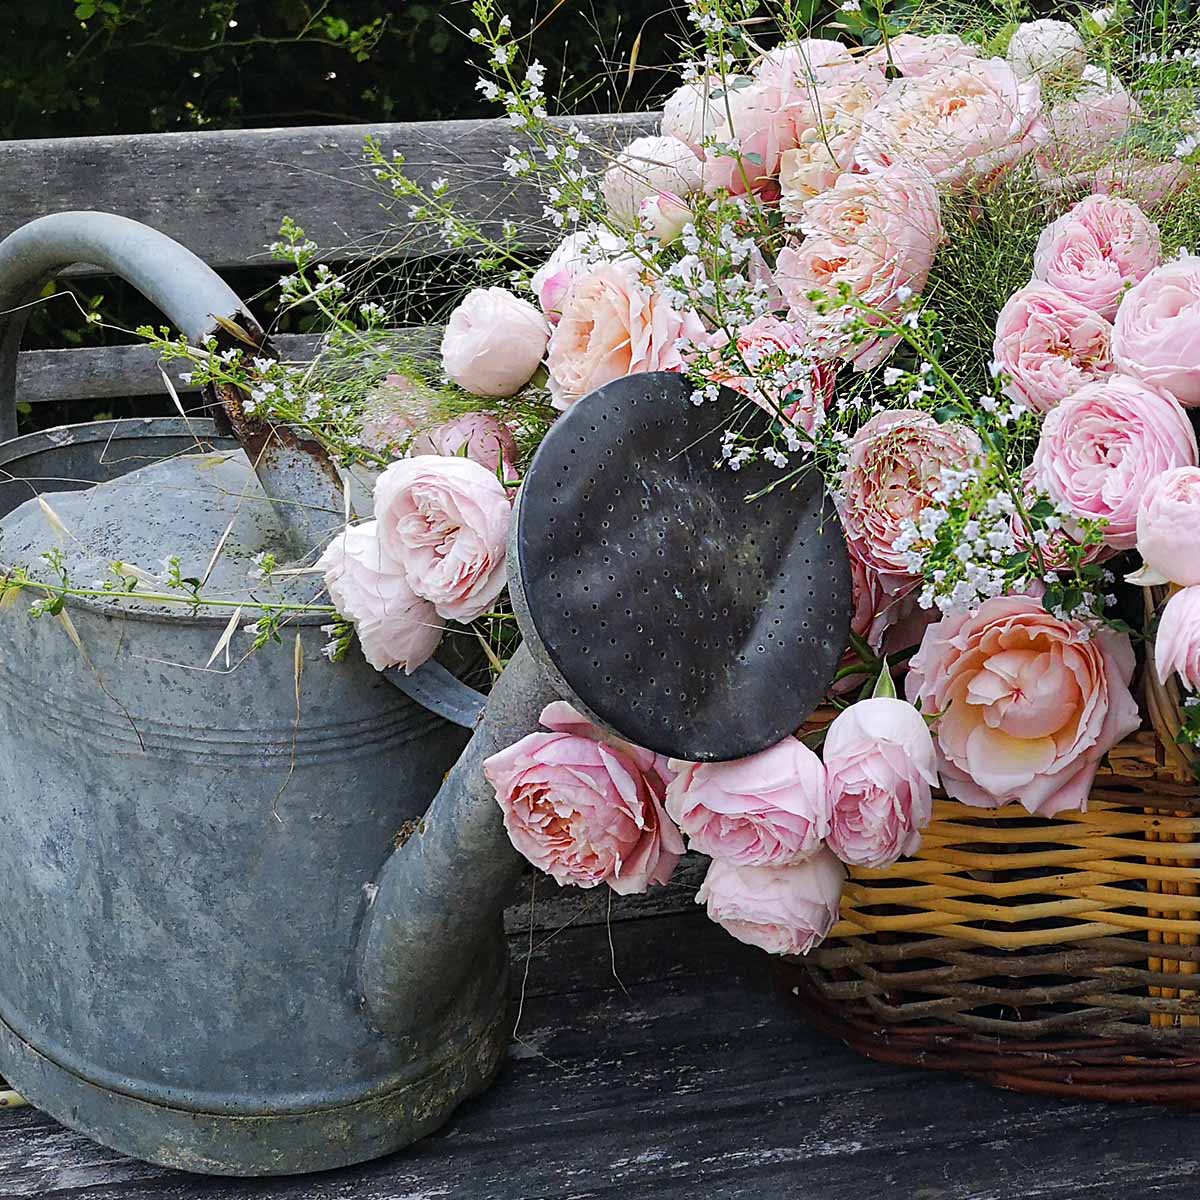 i-love-picking-fresh-roses-from-my-garden-featured